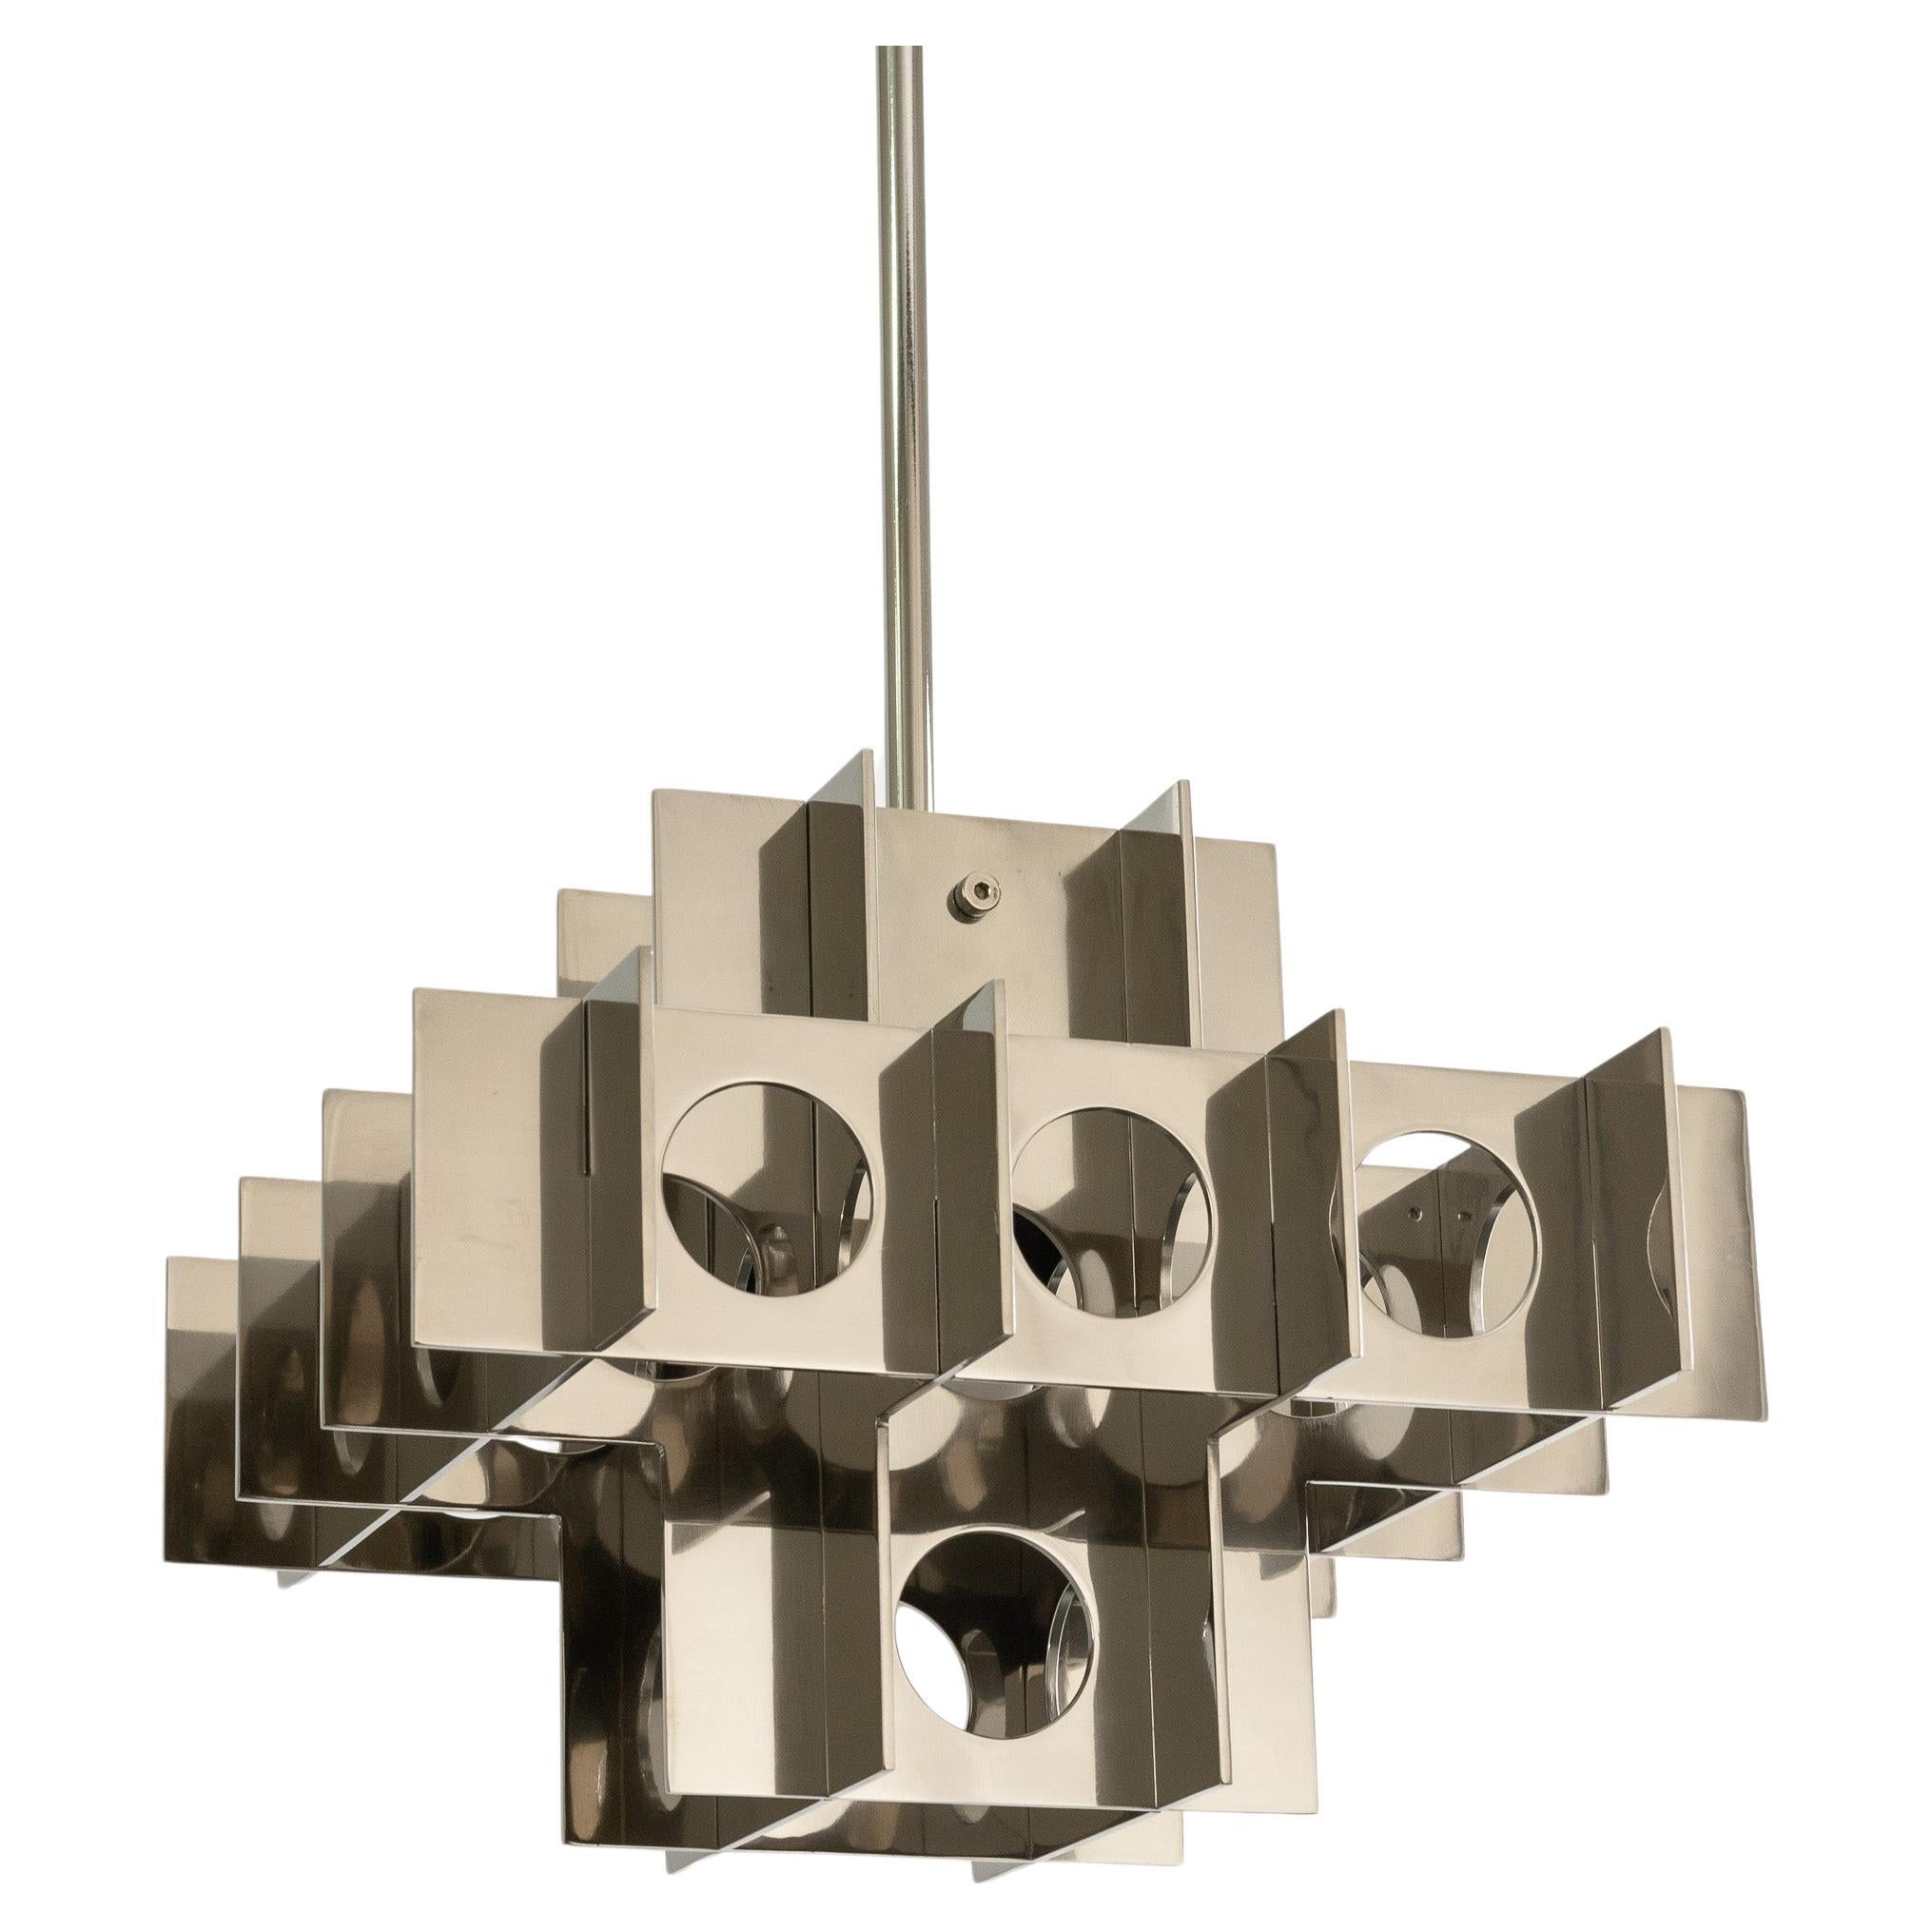 TENFOLD PENDANT 3TB 32inch by Luft Tanaka Studio

Composed of interlocking mirror polished metal panels, the Tenfold Series is inspired by the aesthetics, architectural styles, and art movements of the 1970s. The light fixture works well as a single